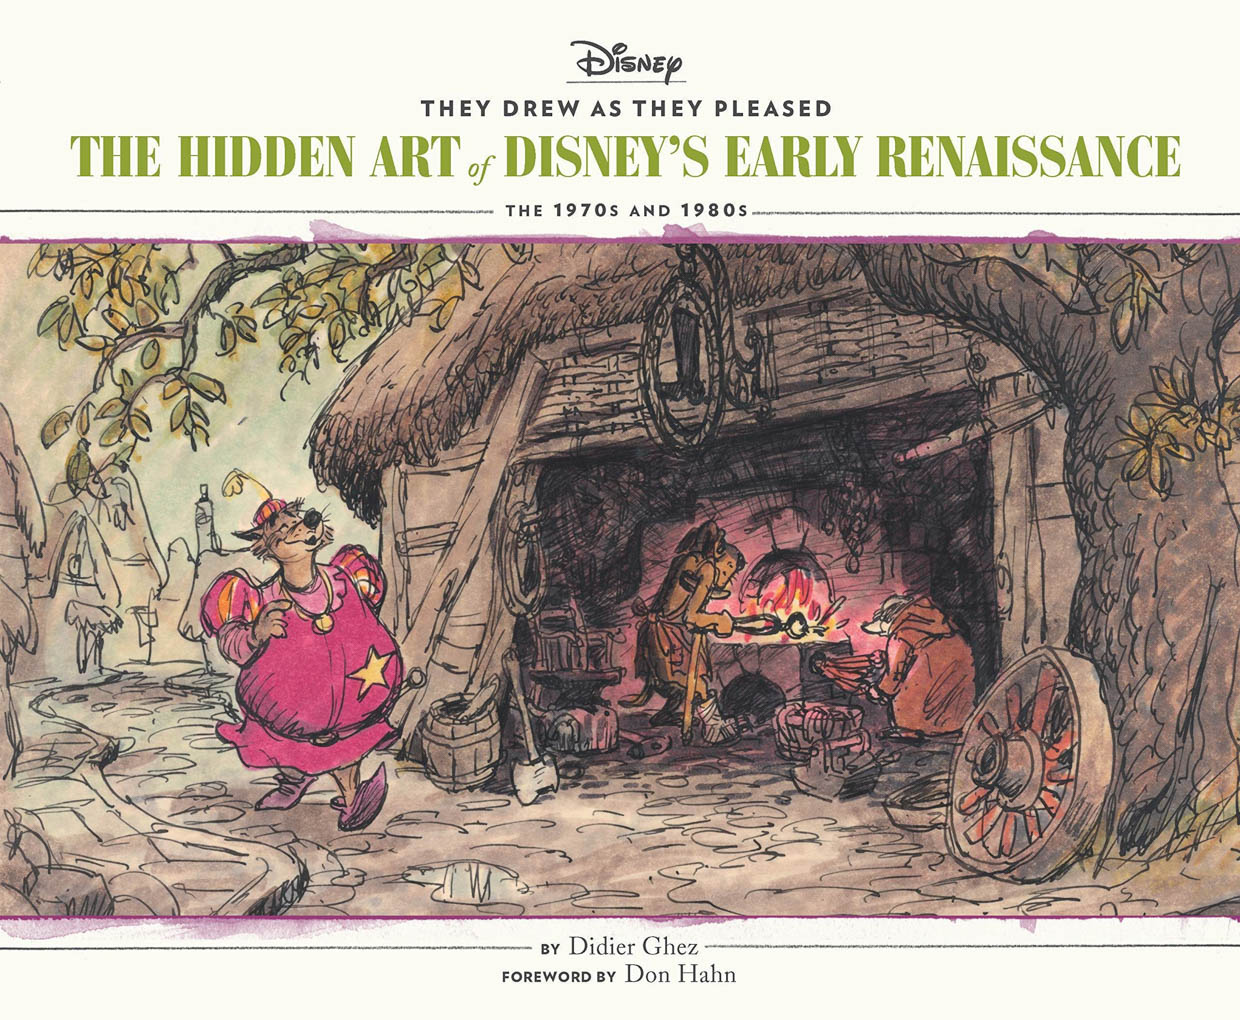 The Hidden Art of Disney: They Drew as They Pleased